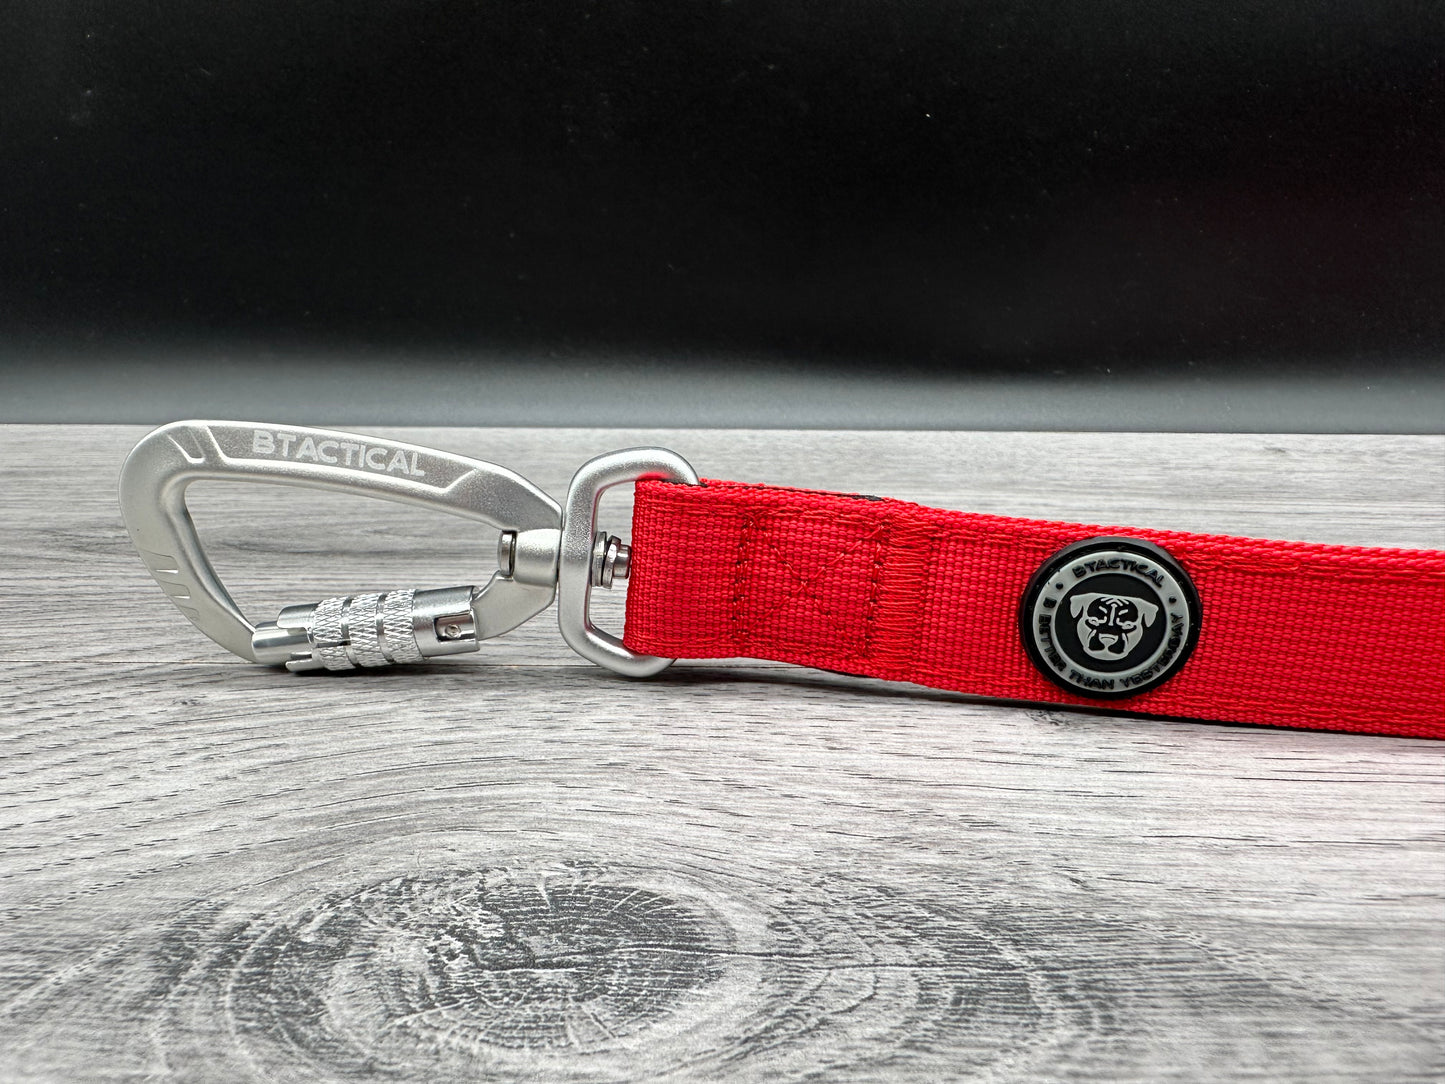 BTactical Lead - Red | 150cm Extra Strong, Durable Carabiner Clip Dog Lead